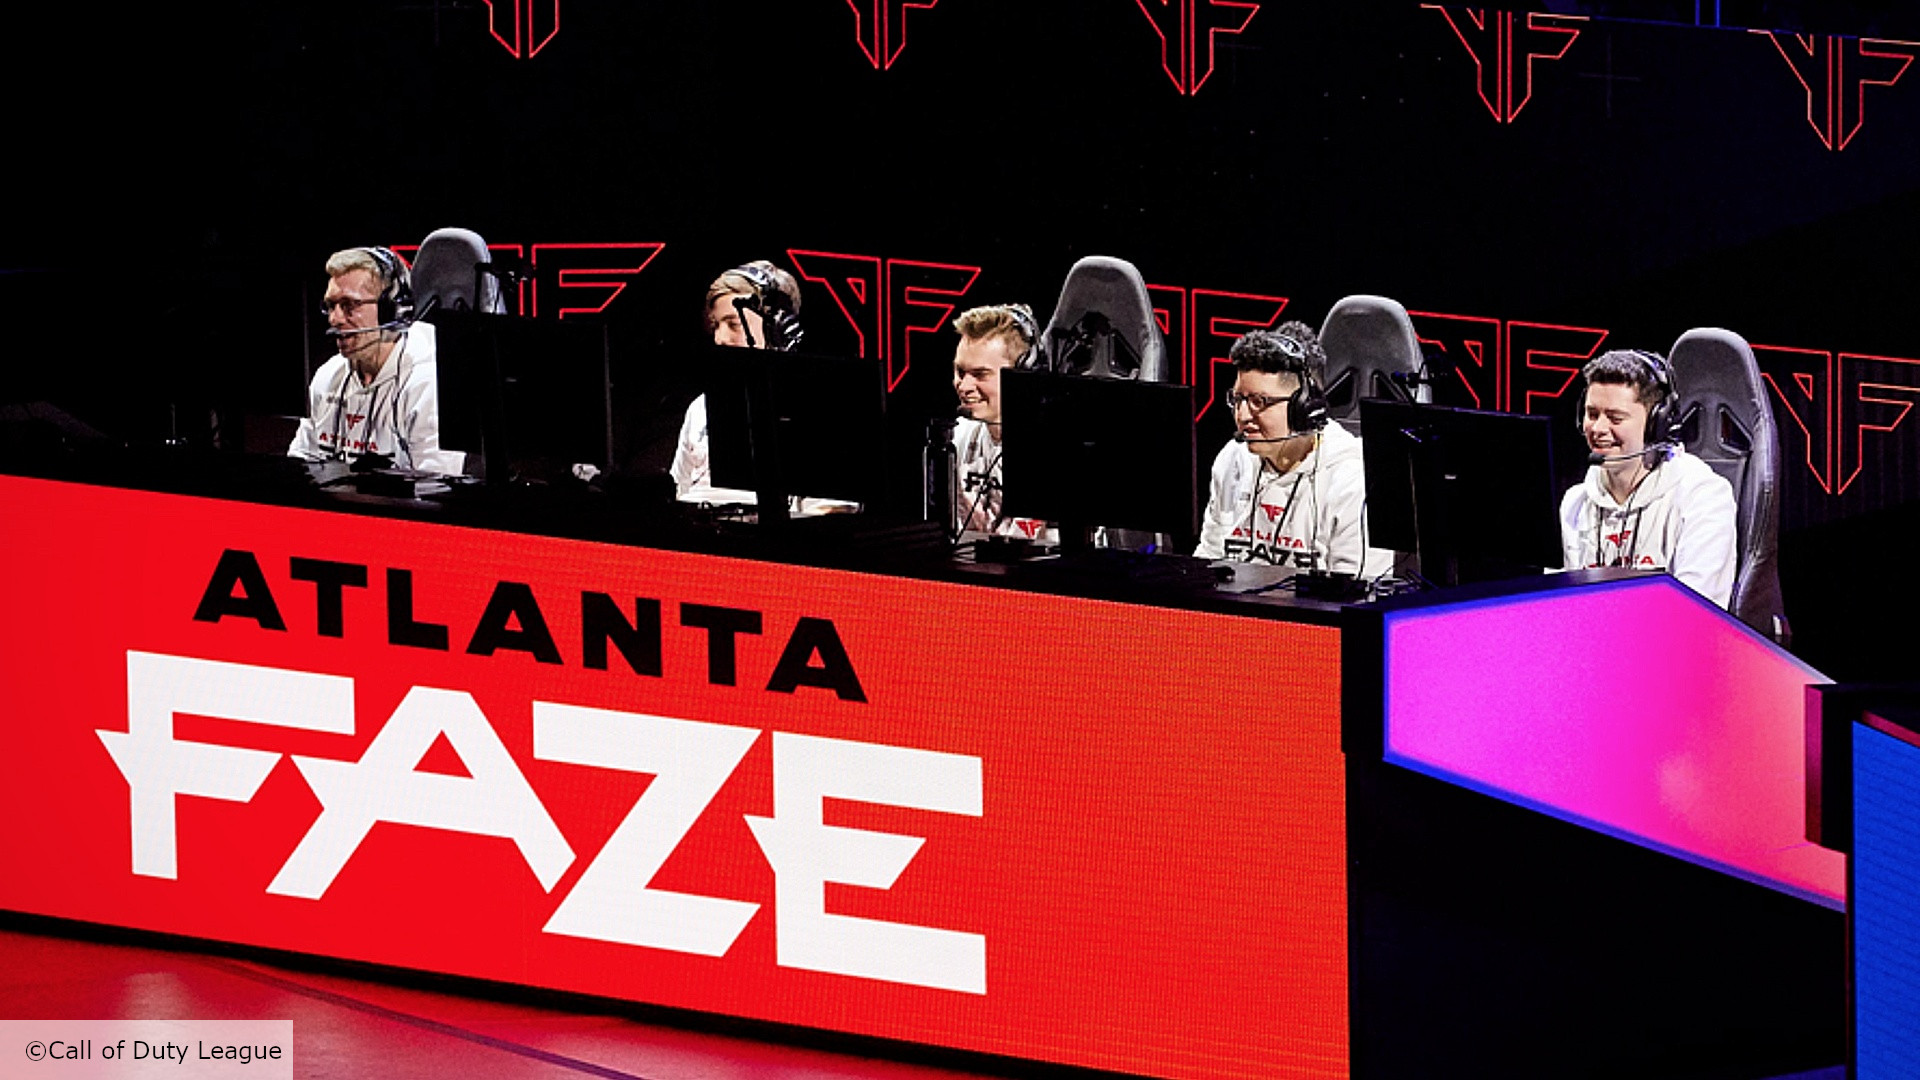 Call of Duty League 2021: Rosters, format, schedule, and more | The Loadout